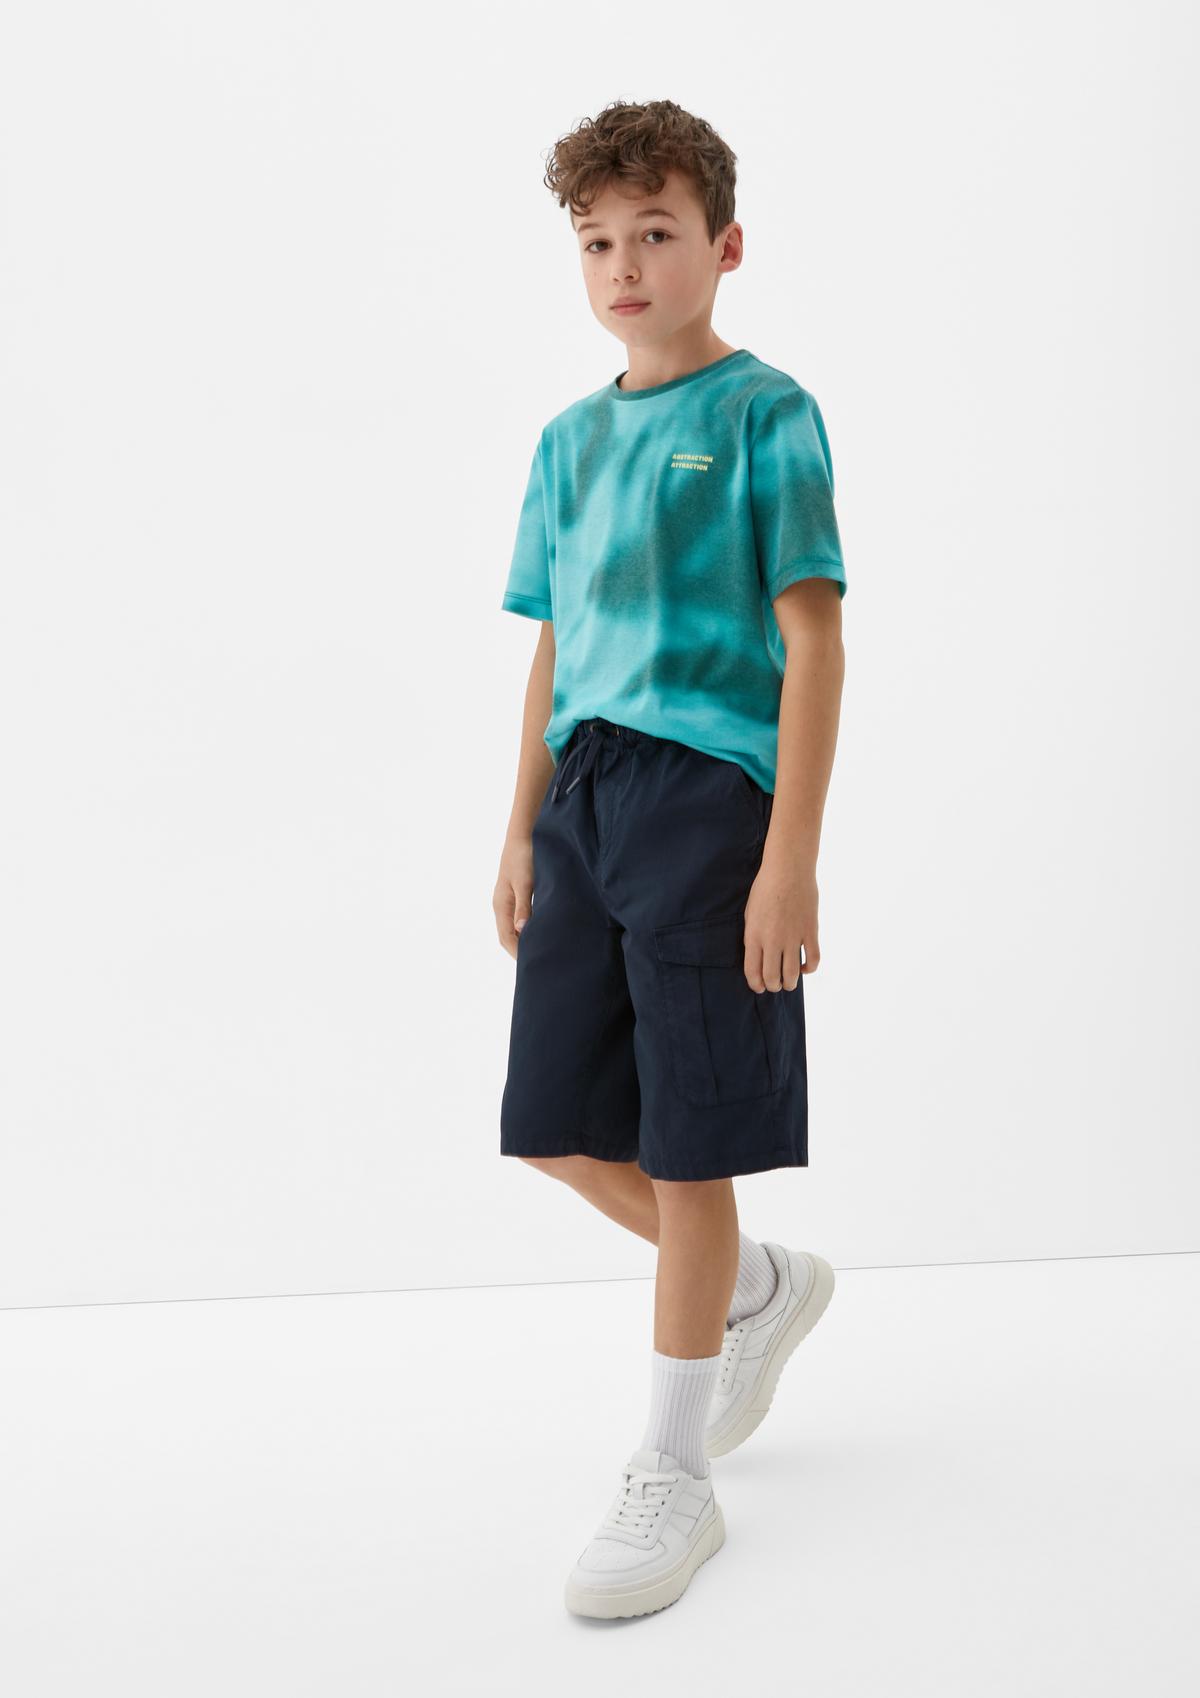 Find and boys Bermuda teens for shorts online